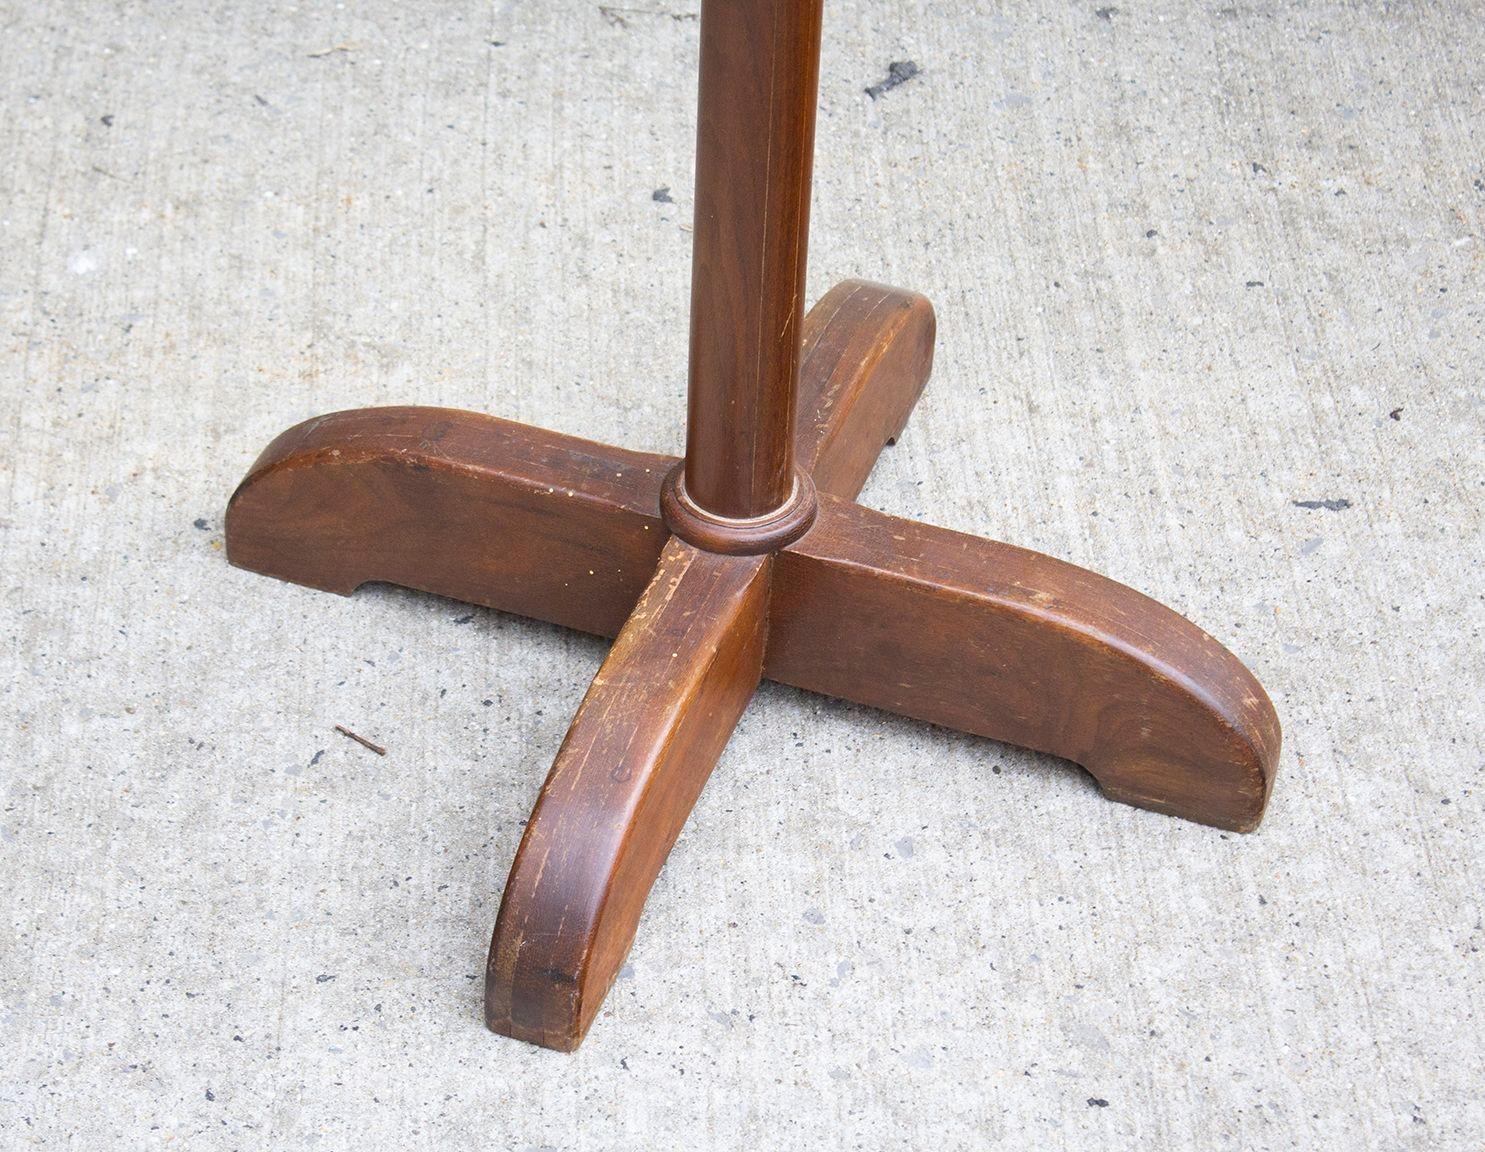 USA, 1940s
Wooden coat rack stand with a chunky X base and sculpted 'hooks'. Great look to this piece in rich solid hardwood- believe it is mahogany. Sturdy and usable.
Condition notes: In very good condition, with some age appropriate nicks,